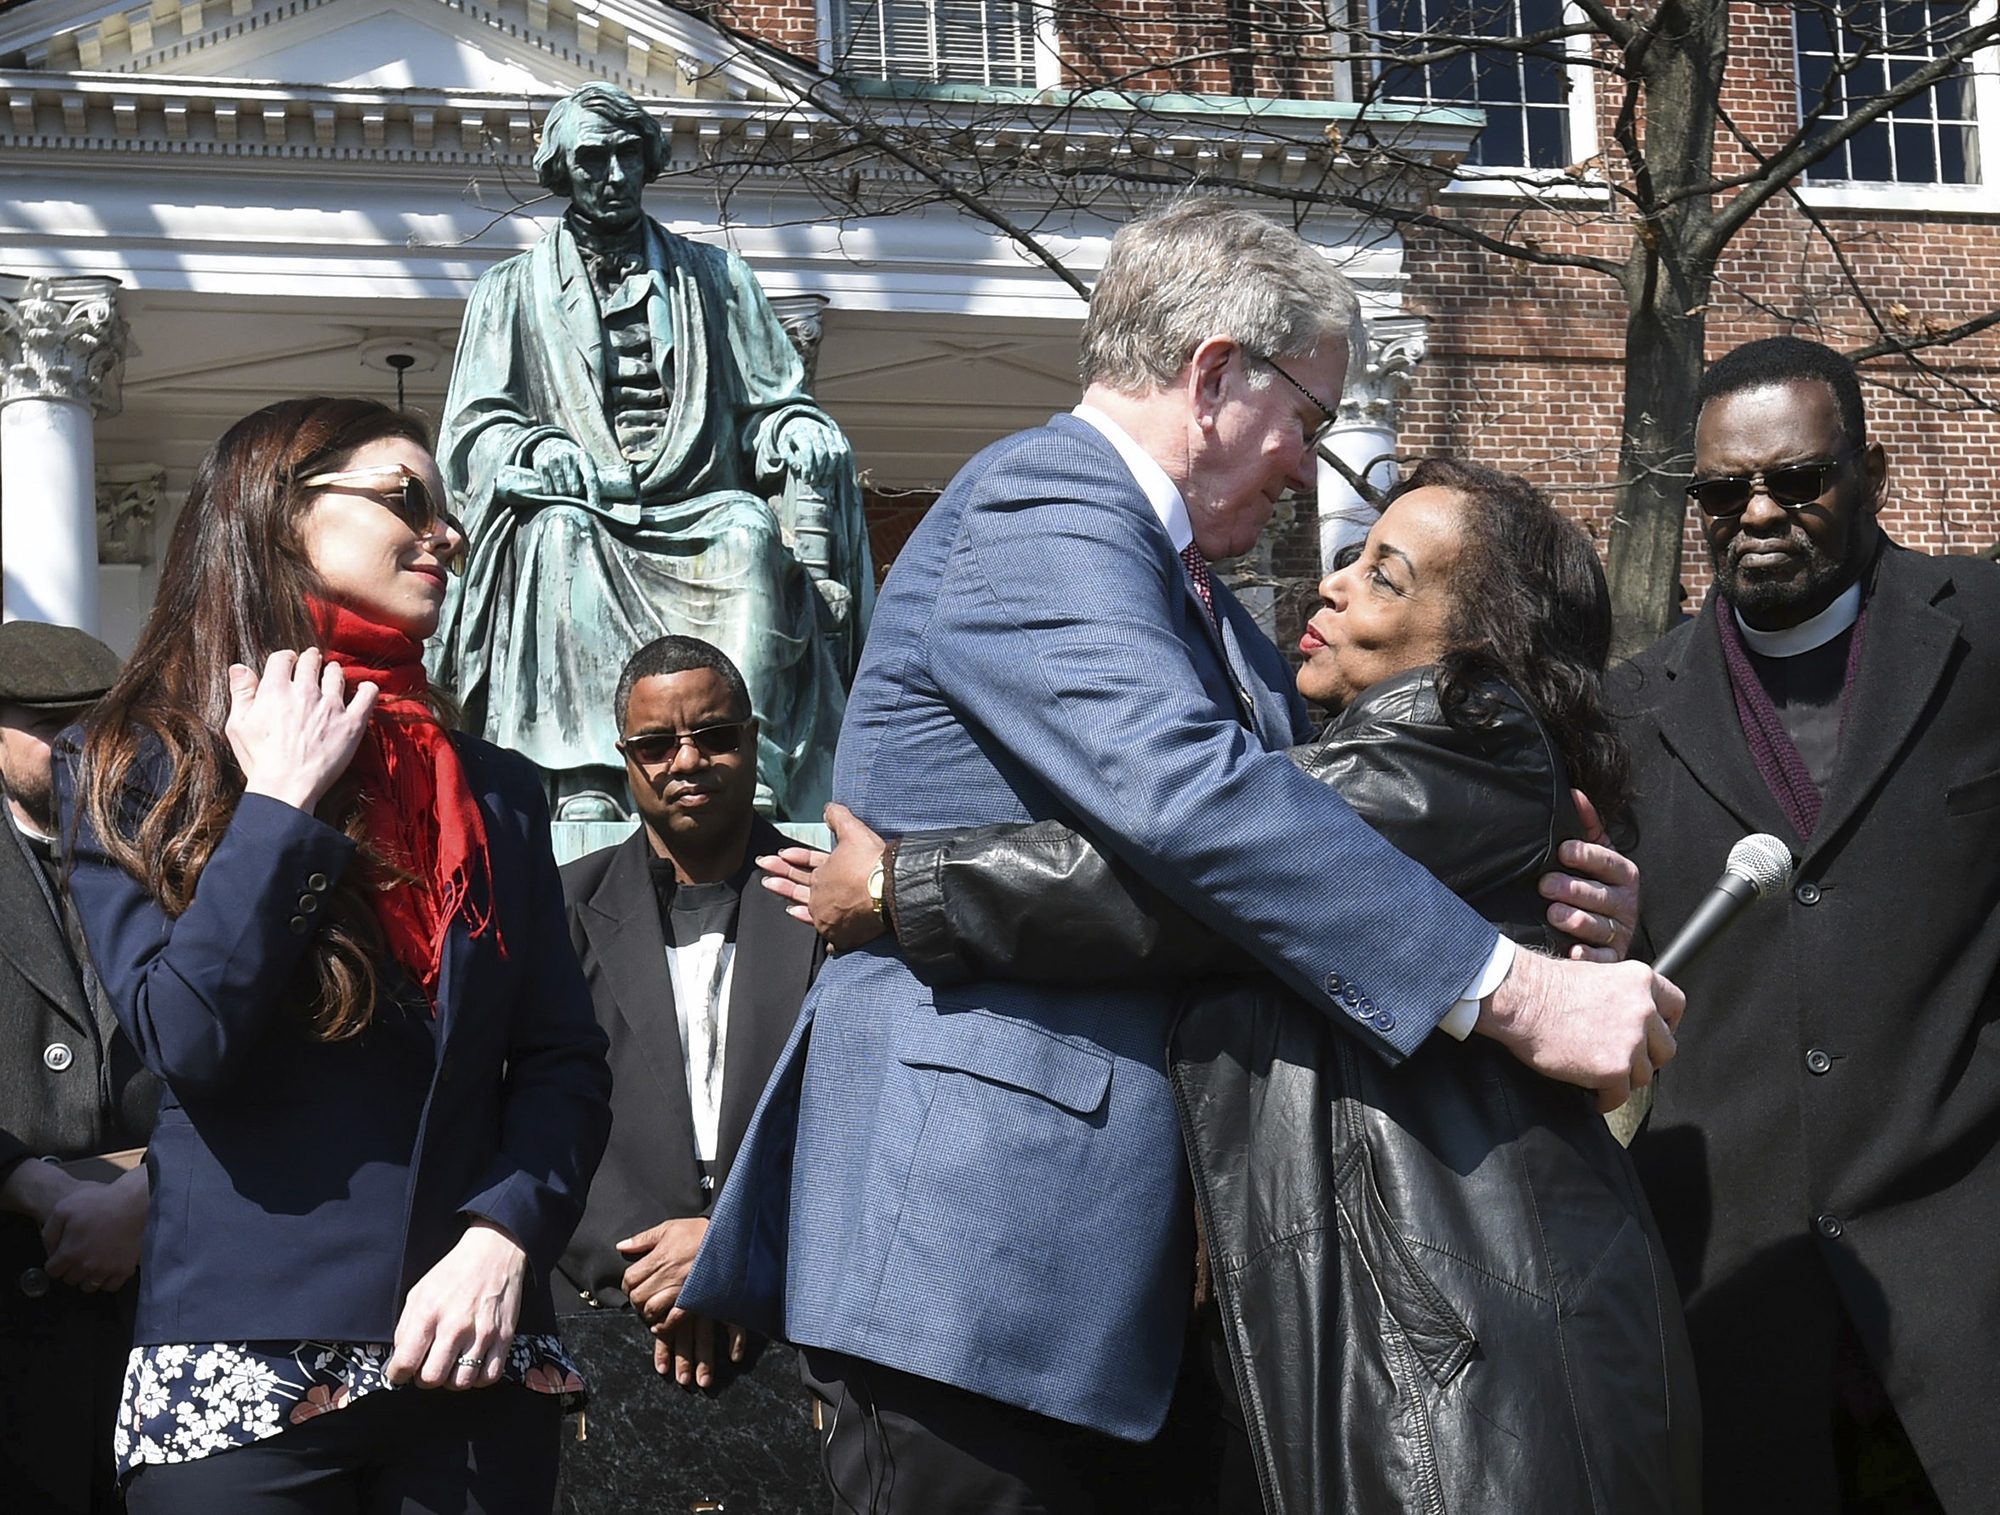 Lynne Jackson, a descendant of Dred Scott, right, hugs Charles Taney III, a descendant of U.S. Supreme Court Chief Justice Roger Taney on the 160th anniversary of the Dred Scott decision in front of the Maryland State House, on March 6, 2017, in Annapolis, Md.